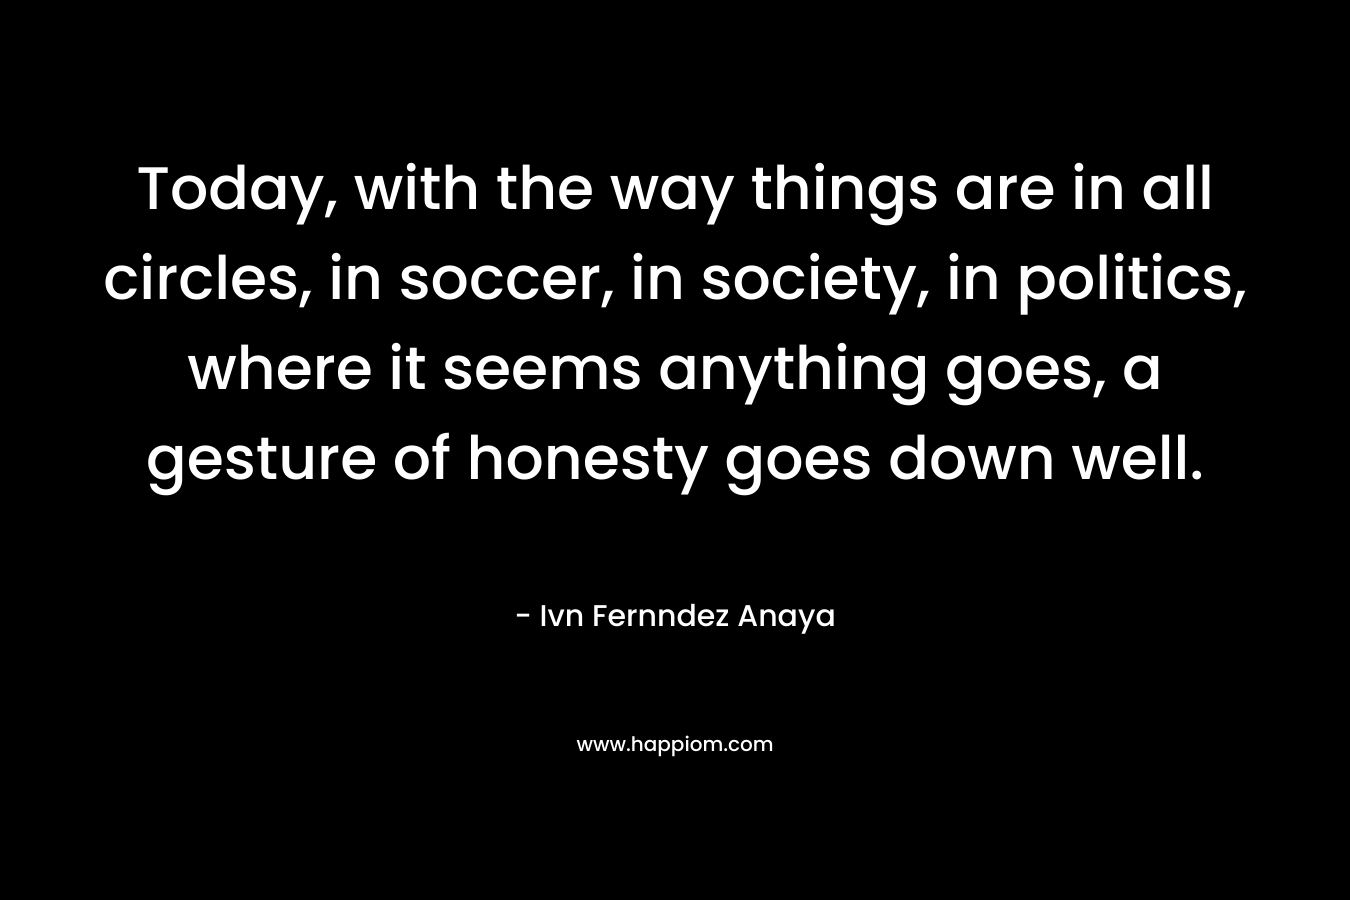 Today, with the way things are in all circles, in soccer, in society, in politics, where it seems anything goes, a gesture of honesty goes down well. – Ivn Fernndez Anaya